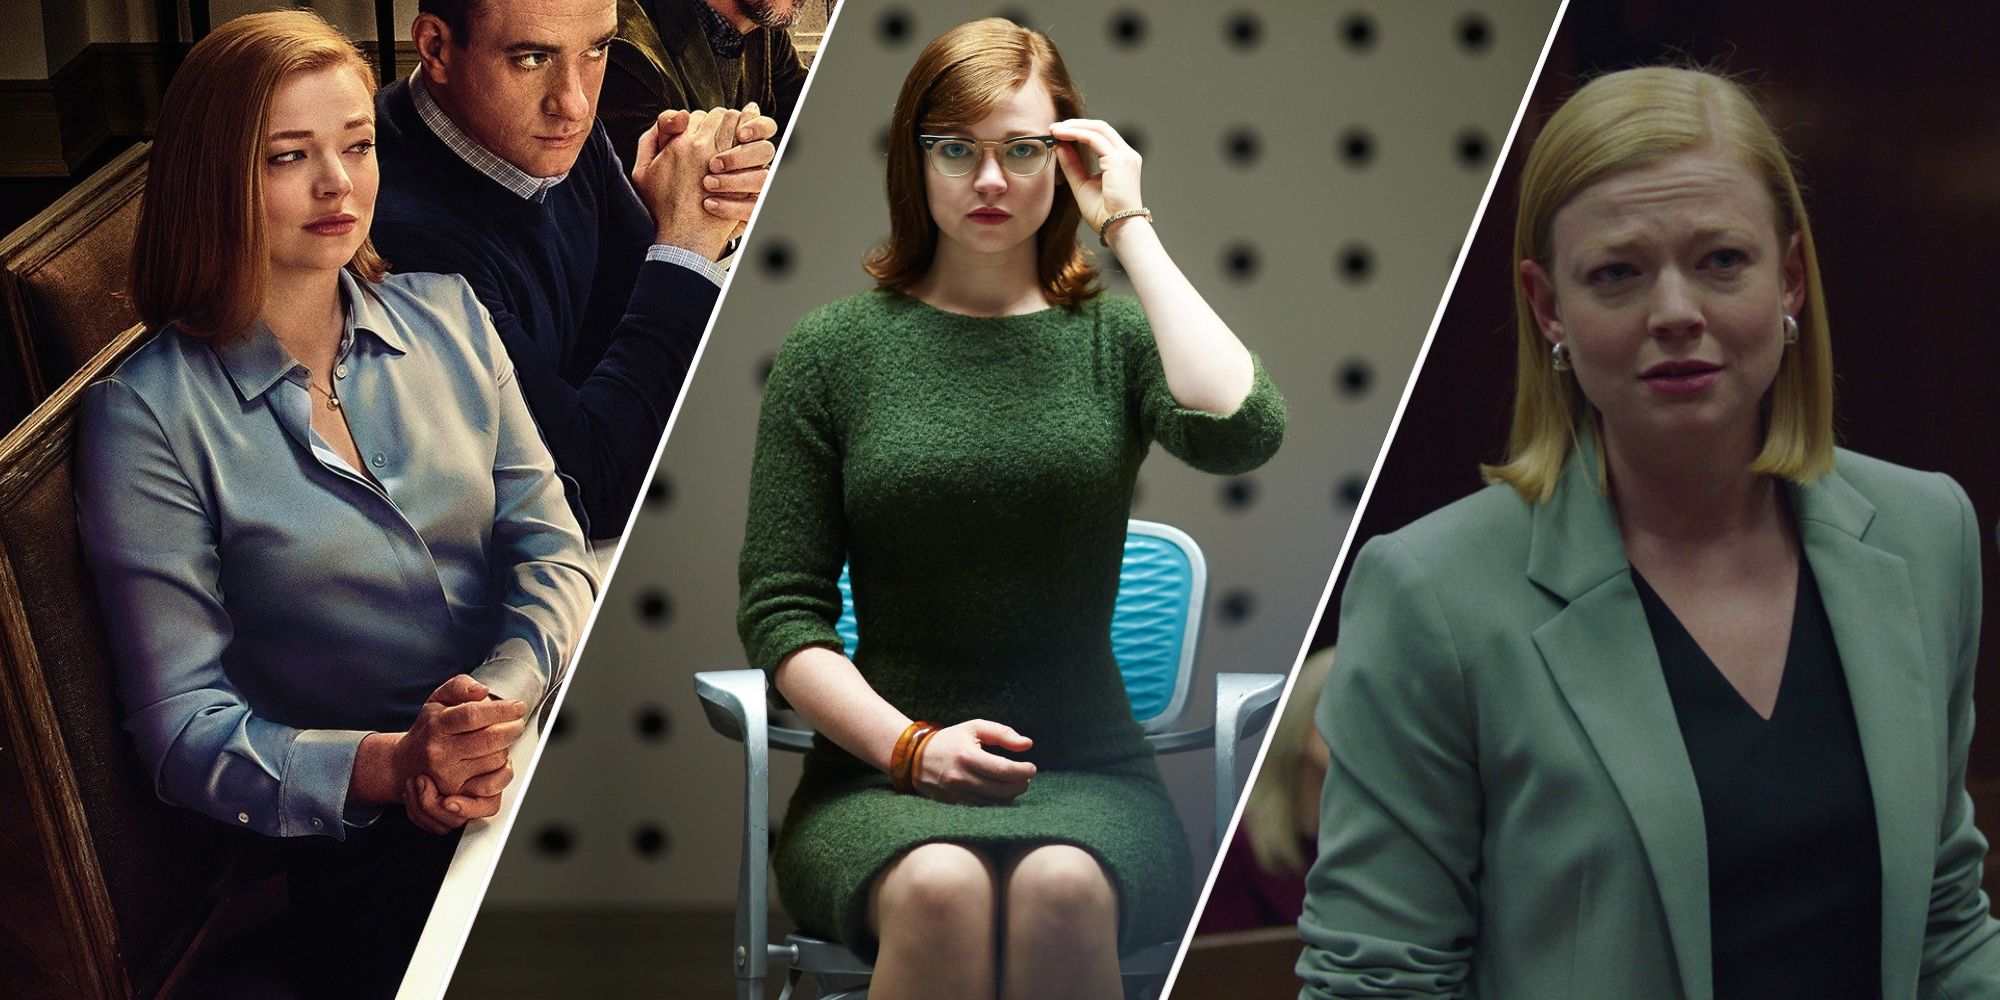 Sarah Snook's 10 Best Movies & TV Shows, Ranked According to Rotten Tomatoes